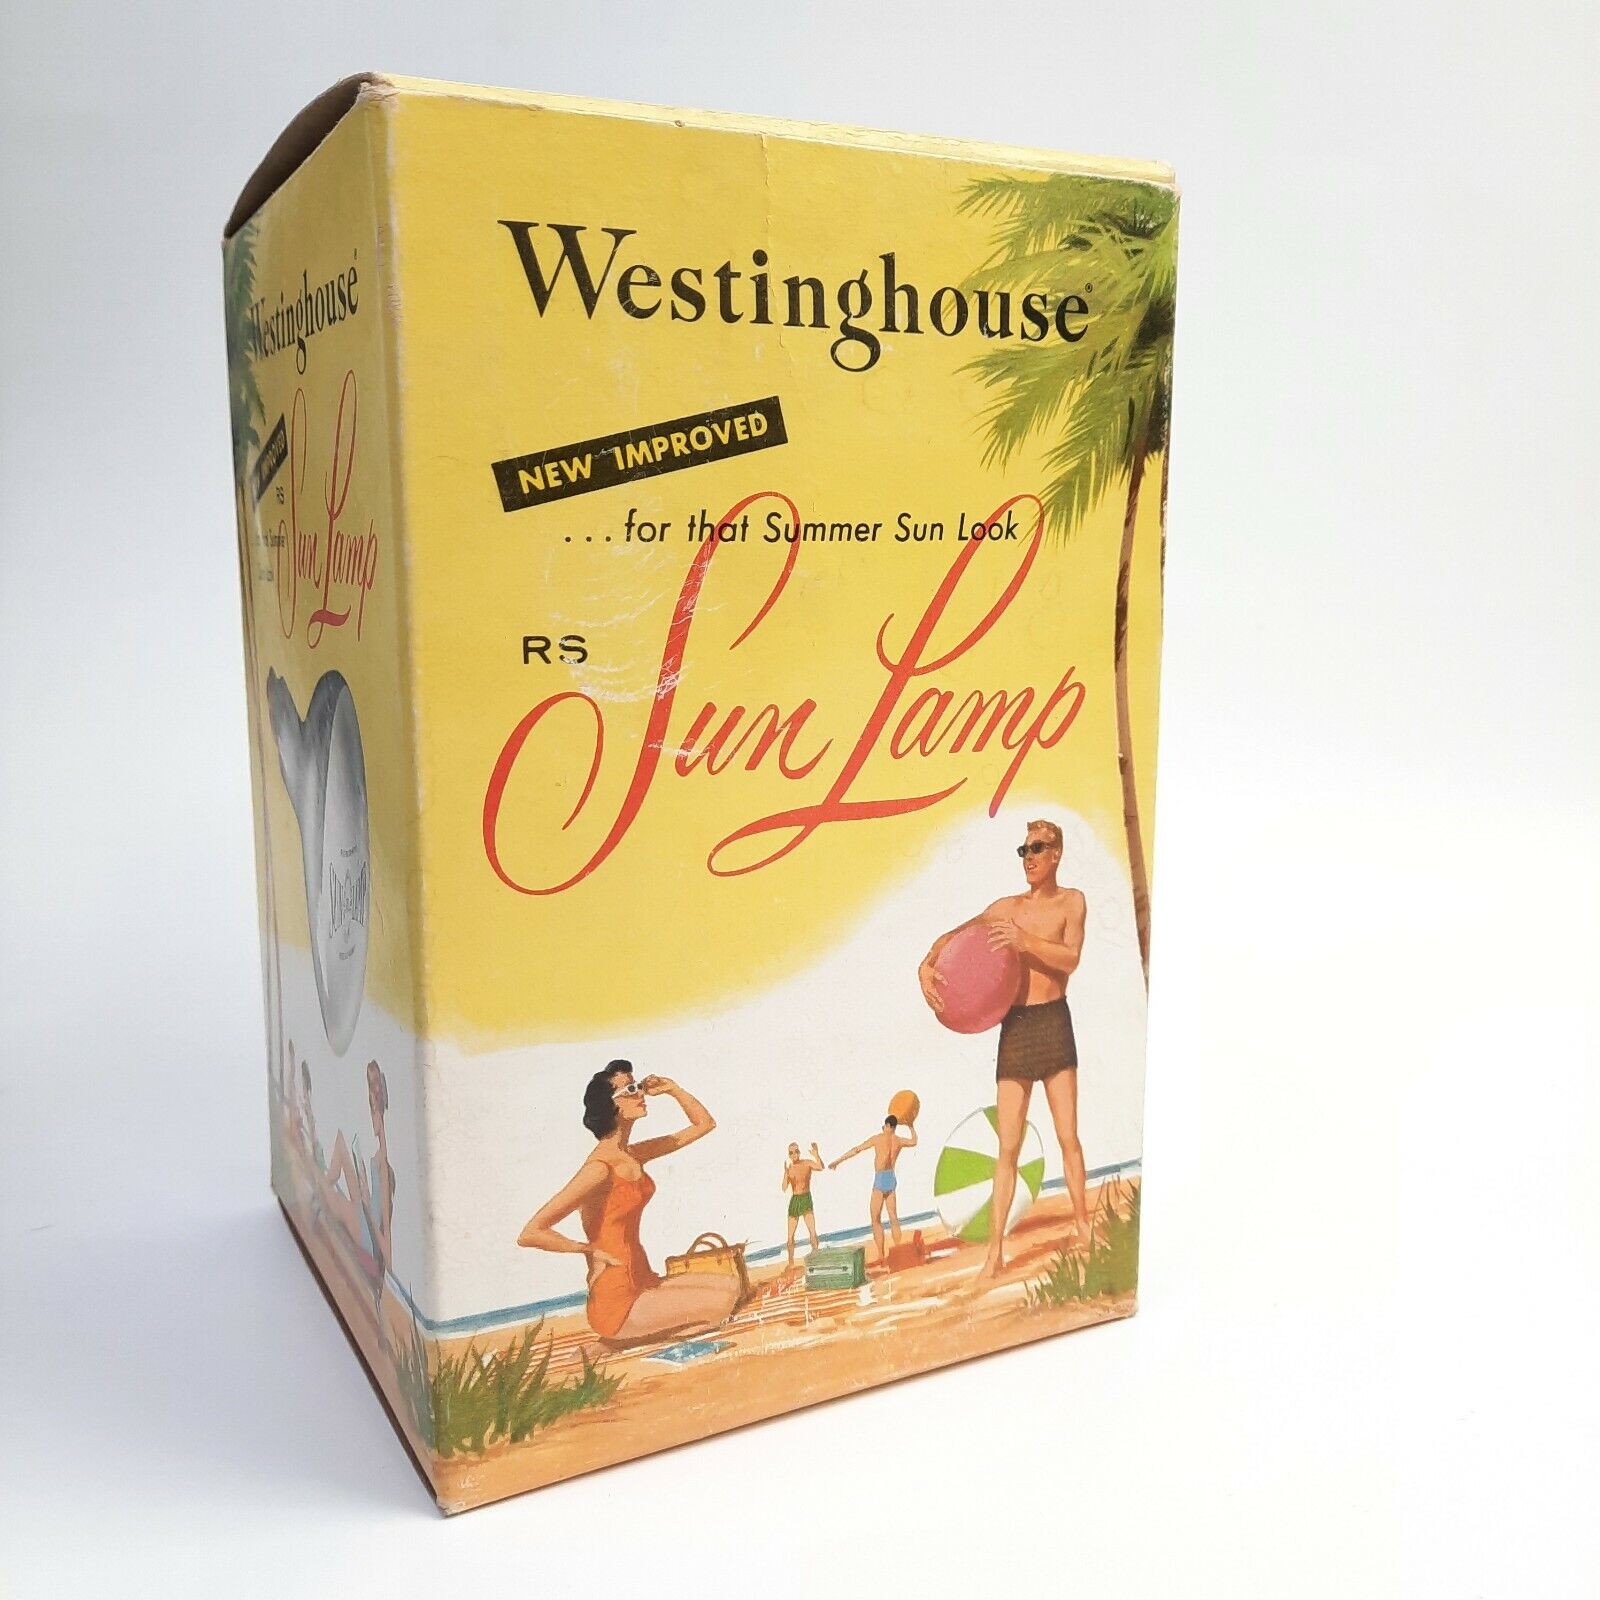 Westinghouse VTG Sun Lamp Tanning BULB 1960's Graphics Yellow Box Type RS 275W